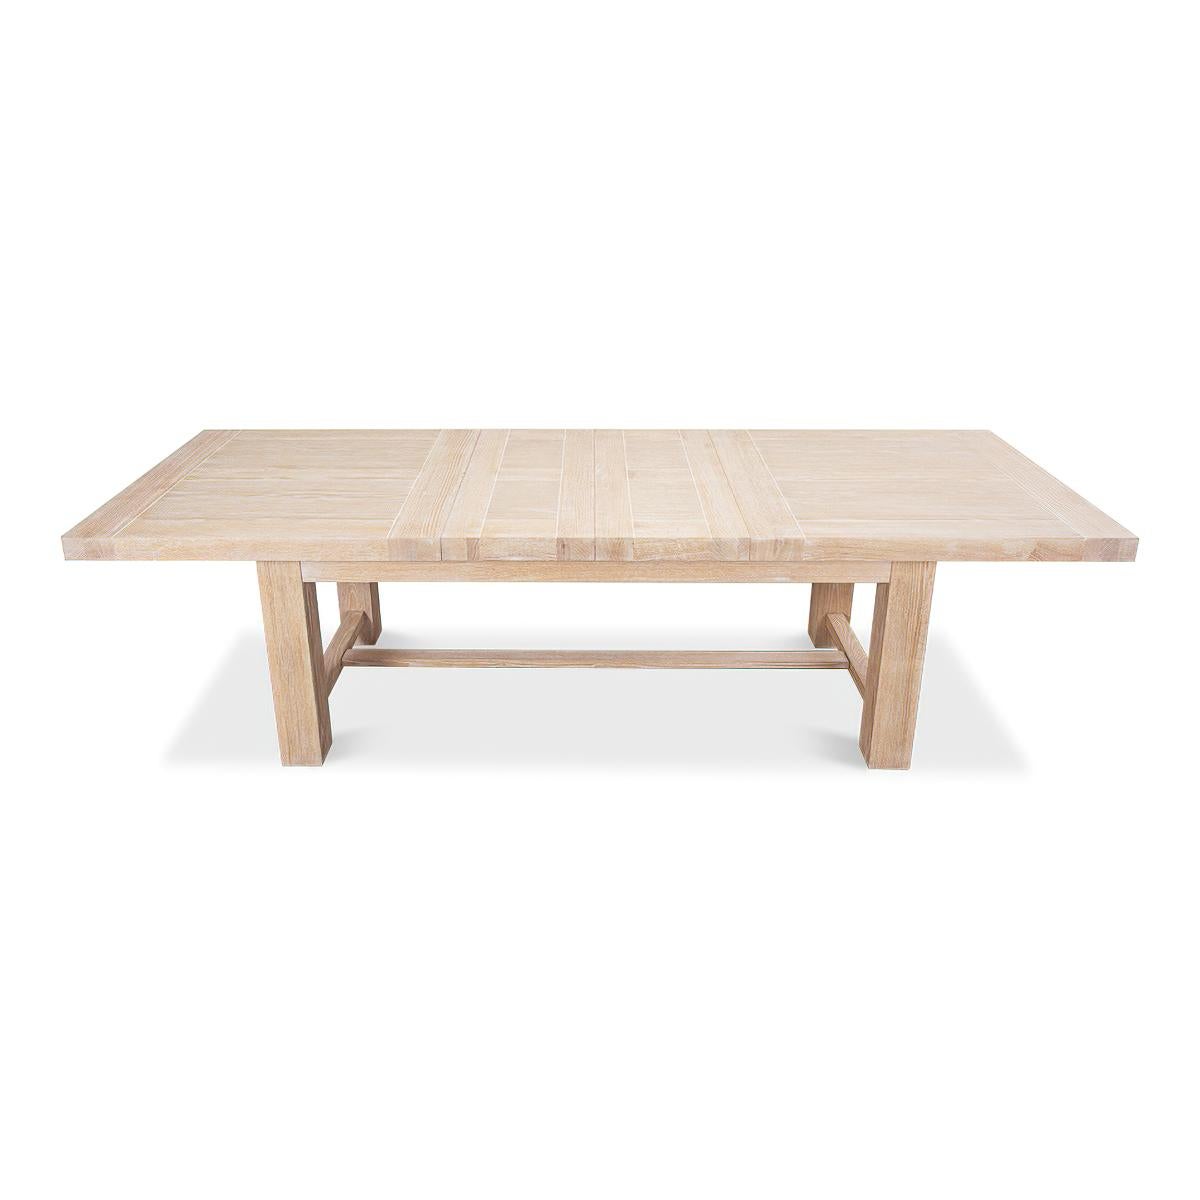 Contemporary Swedish Modern Oak Extension Dining Table For Sale